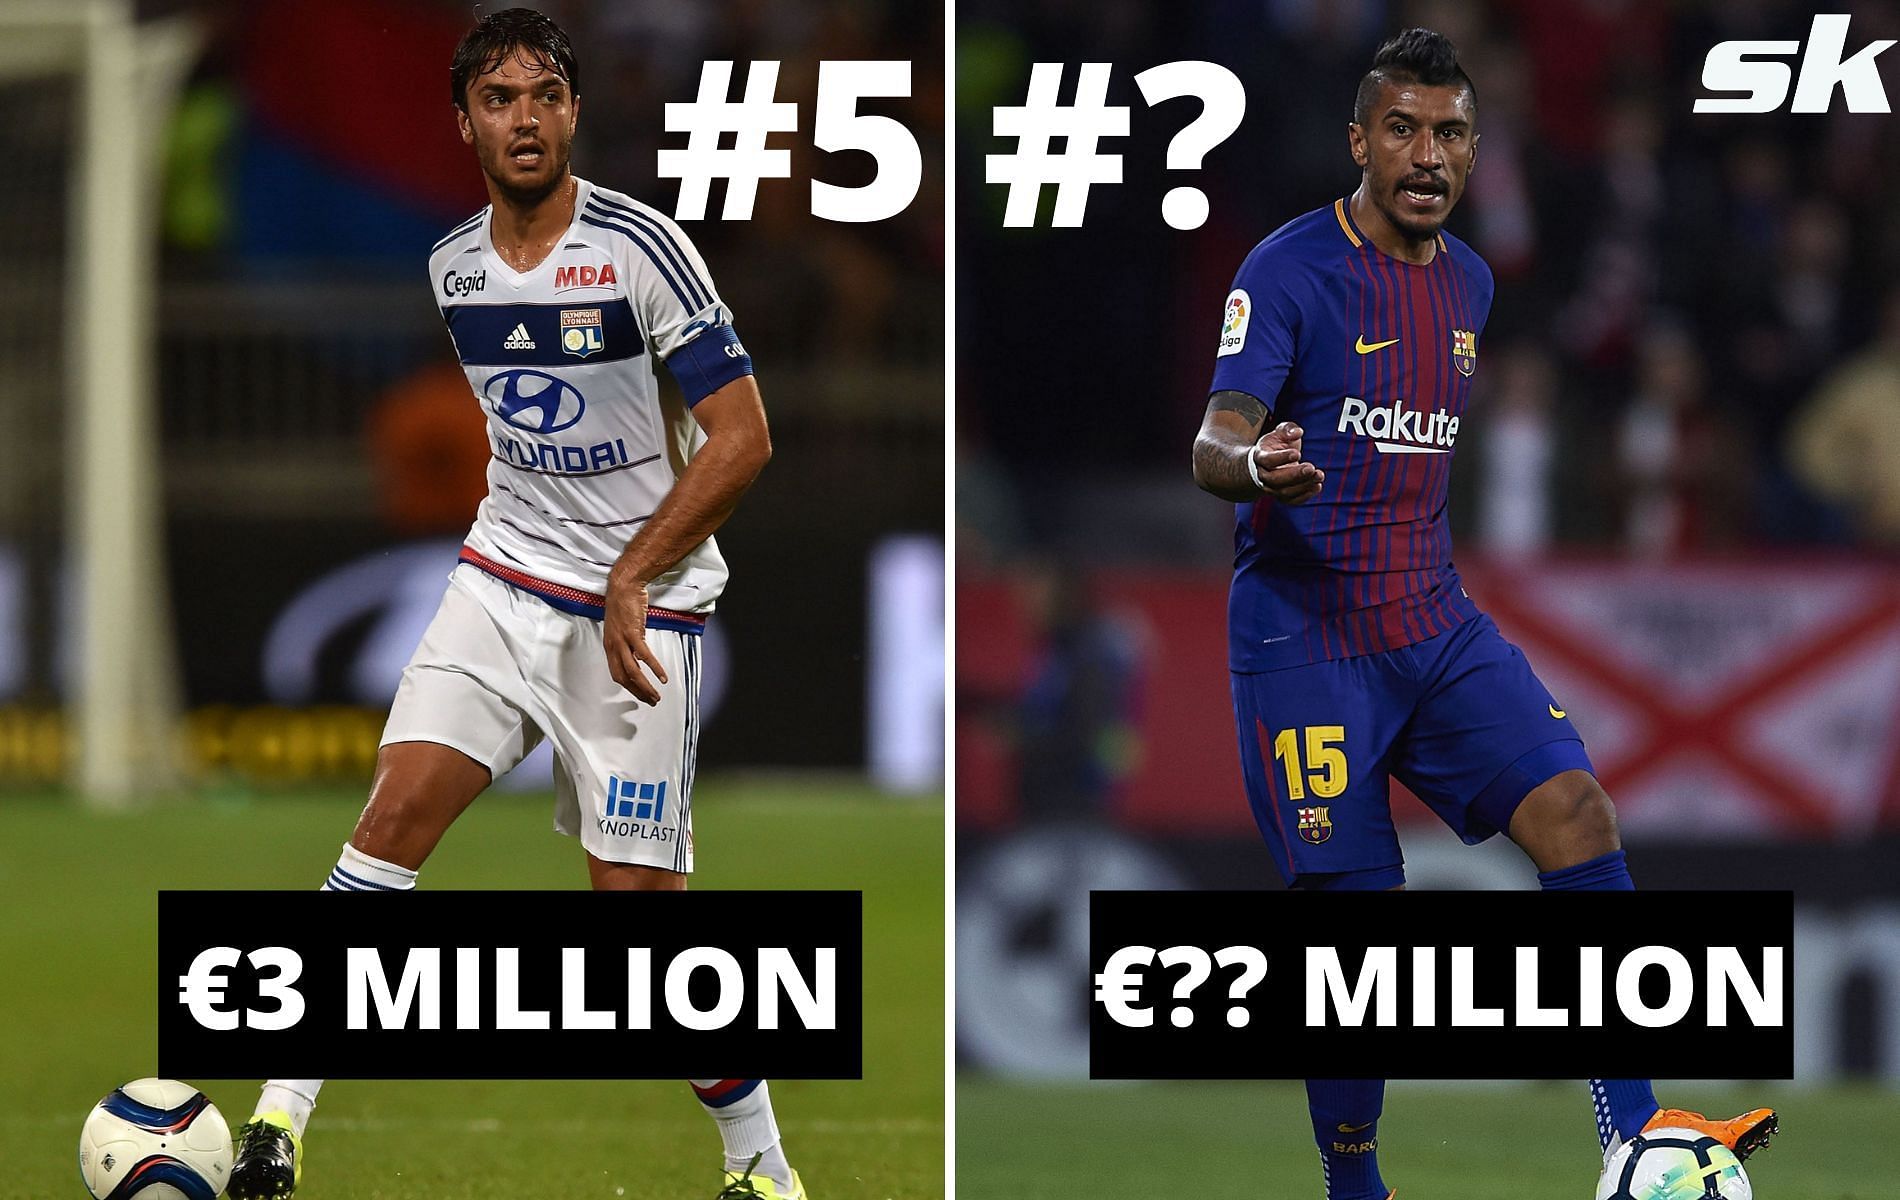 Paulinho is a free agent now, but surprisingly he does not top this list!